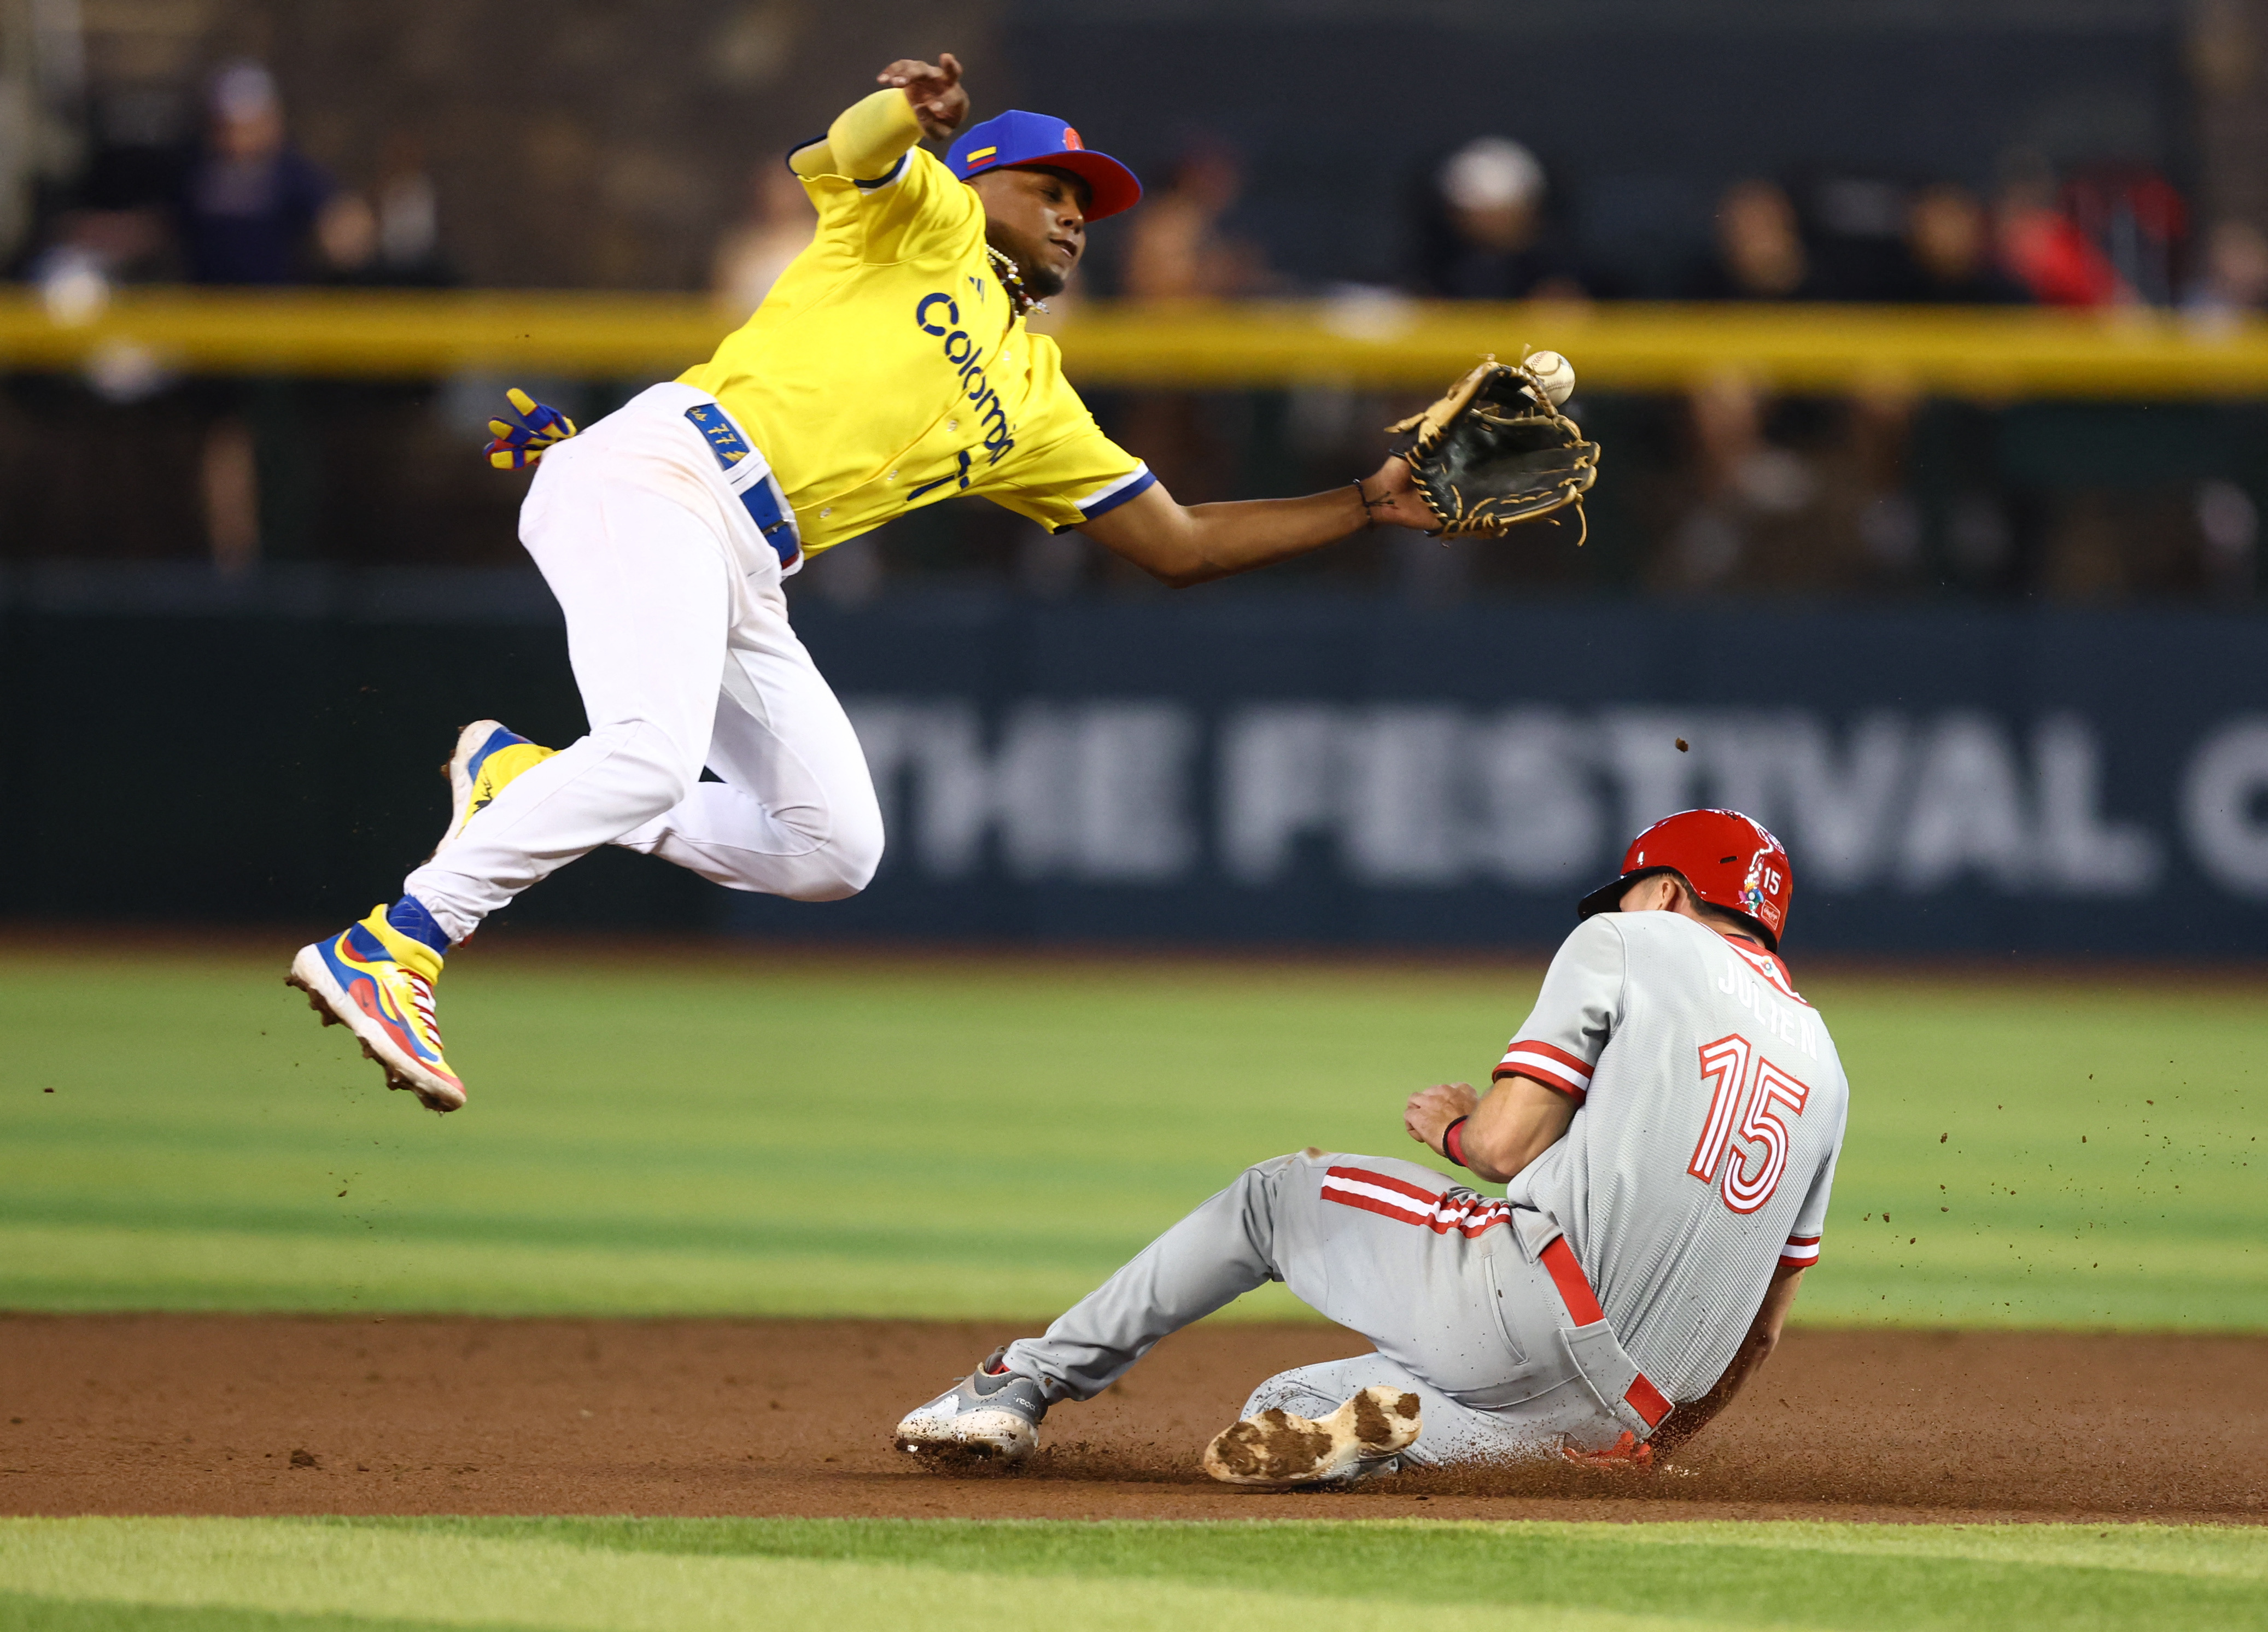 Mar 14, 2023; Phoenix, Arizona, USA; Canada base runner Edouard Julien (15) steals second base ahead of the ball to Colombia shortstop Dayan Frias in the first inning during the World Baseball Classic at Chase Field. Mandatory Credit: Mark J. Rebilas-USA TODAY Sports